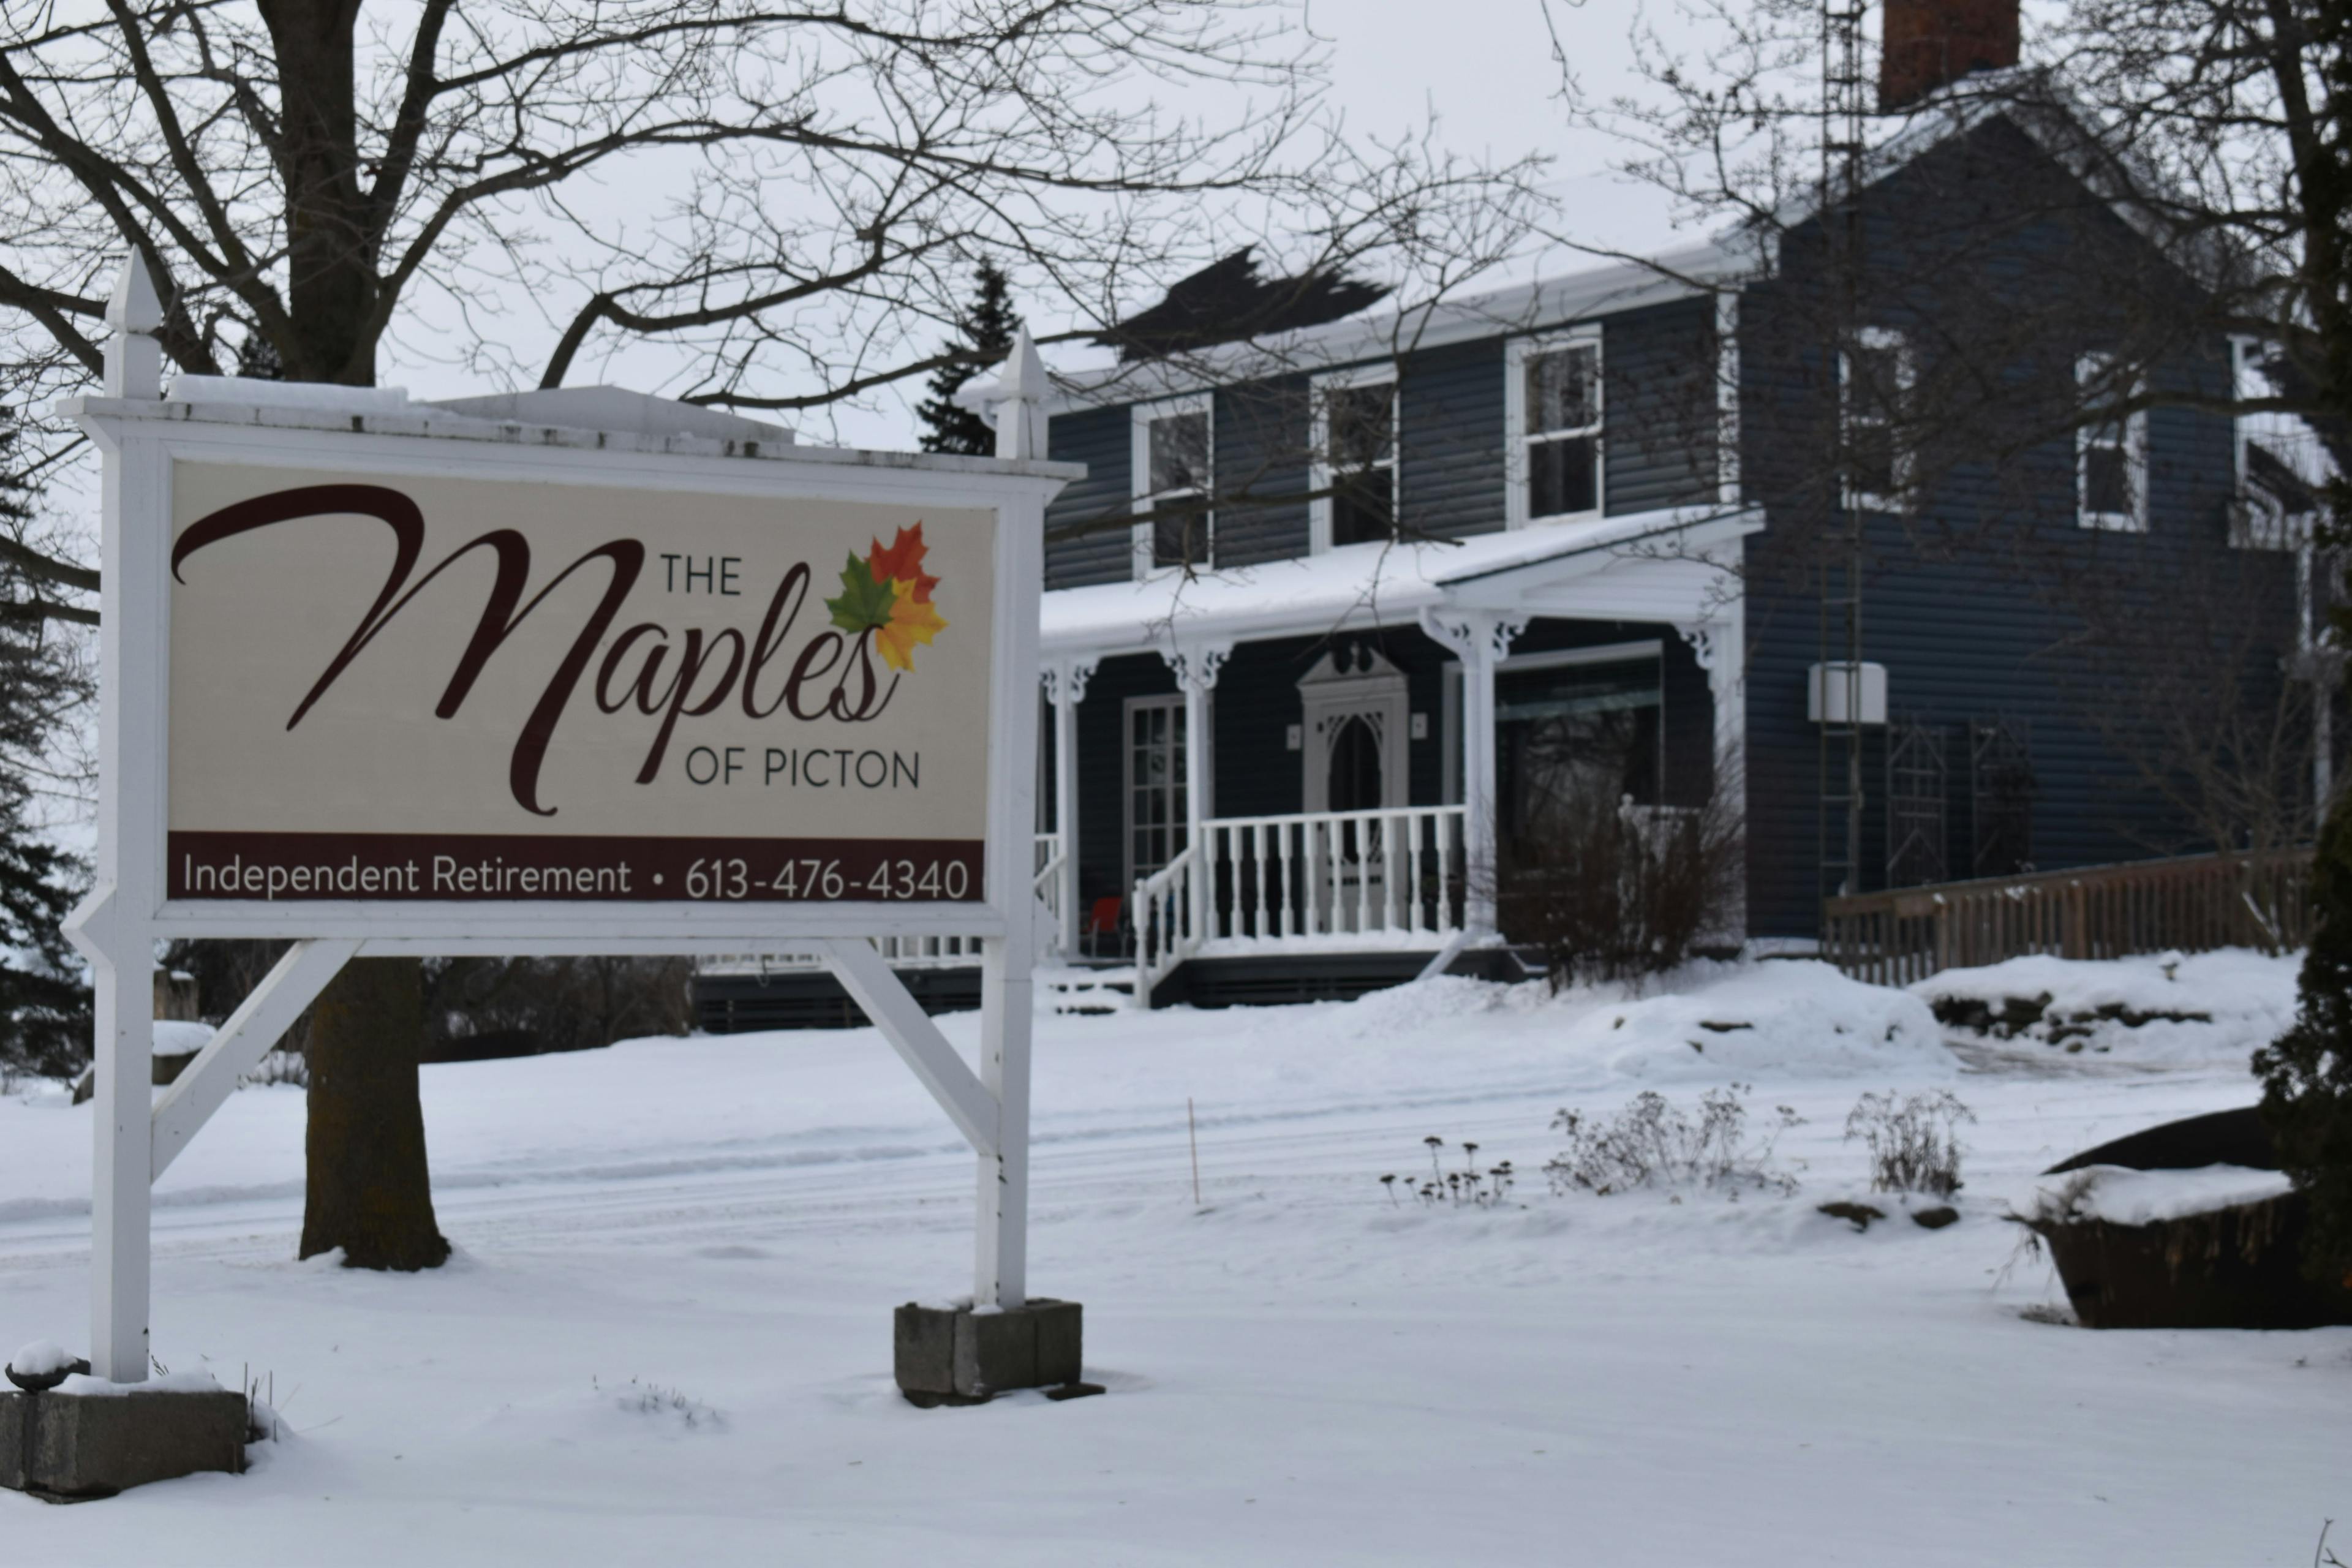 <p>The Maples Retirement Residence on County Rd. 5 just north of Picton will become transitional housing for local residents experiencing homelessness.<br />
The new Leeward House, named after the shelter in a wind, could open as early as May. (Jason Parks/Gazette staff)</p>
